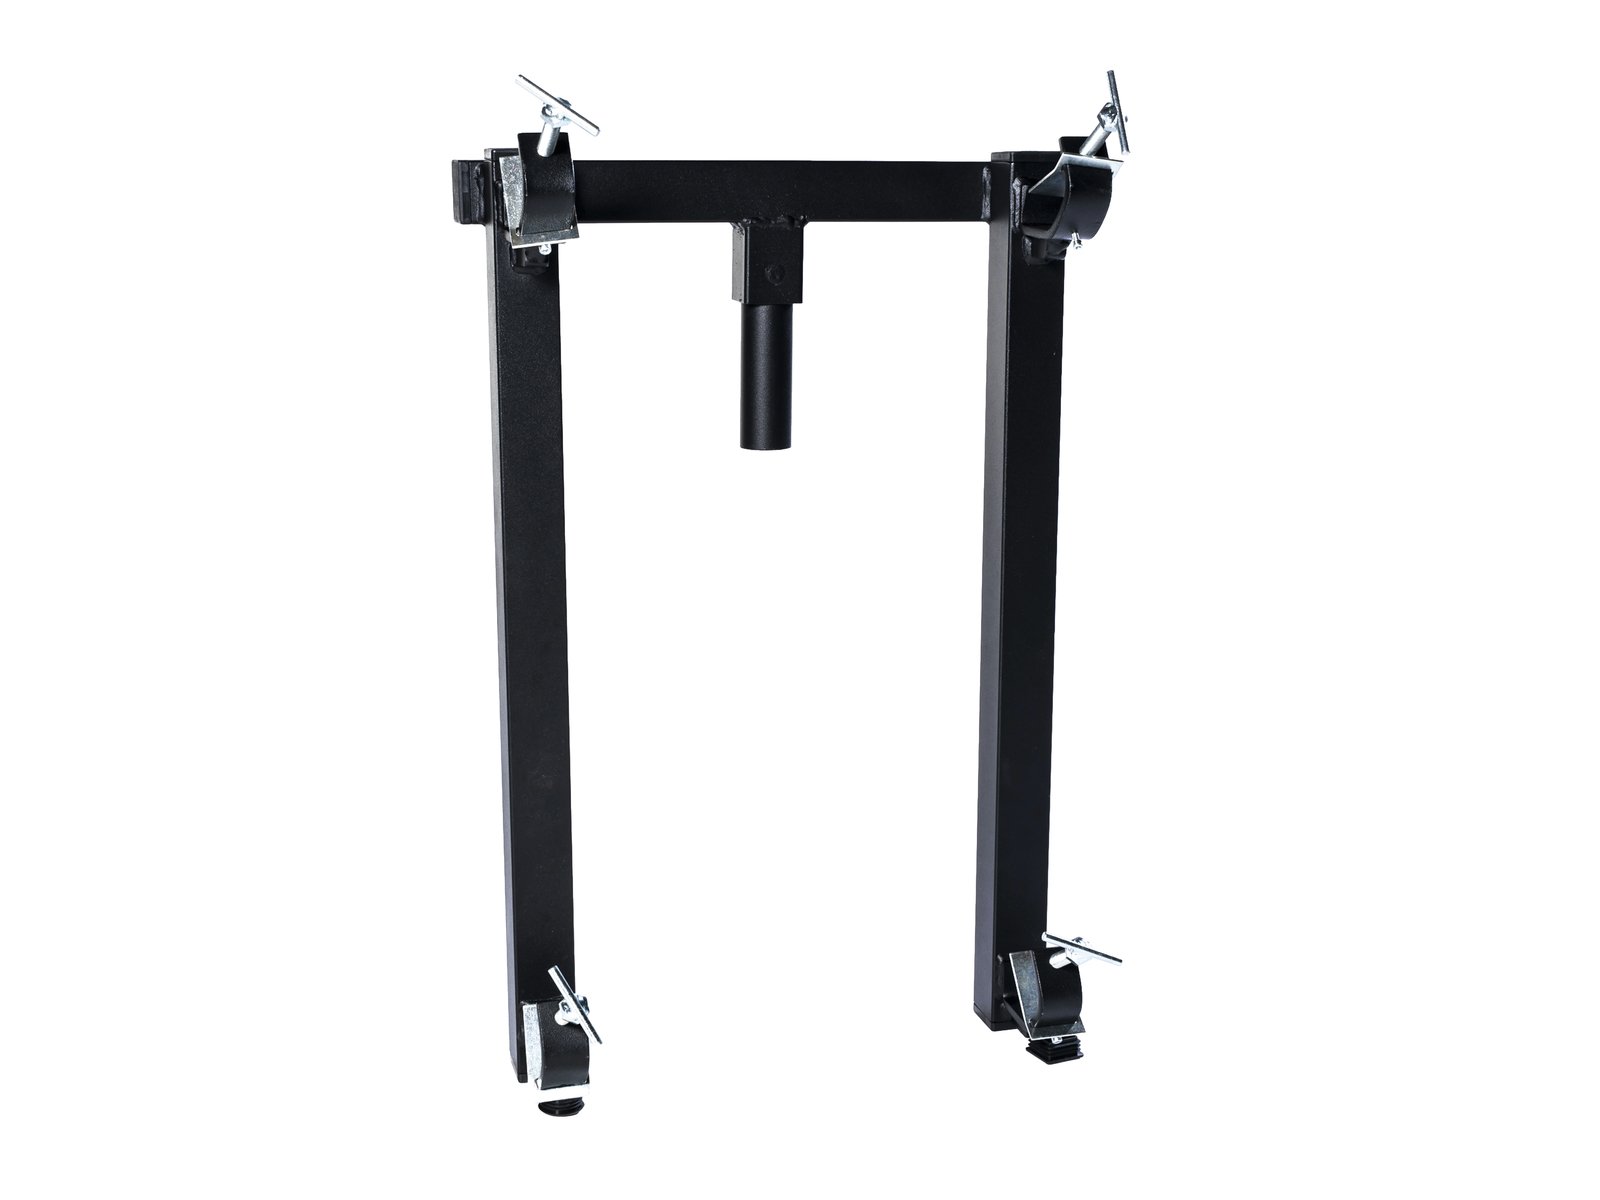 BLOCK AND BLOCK AM3508 Double Bar support insertion 35mm male